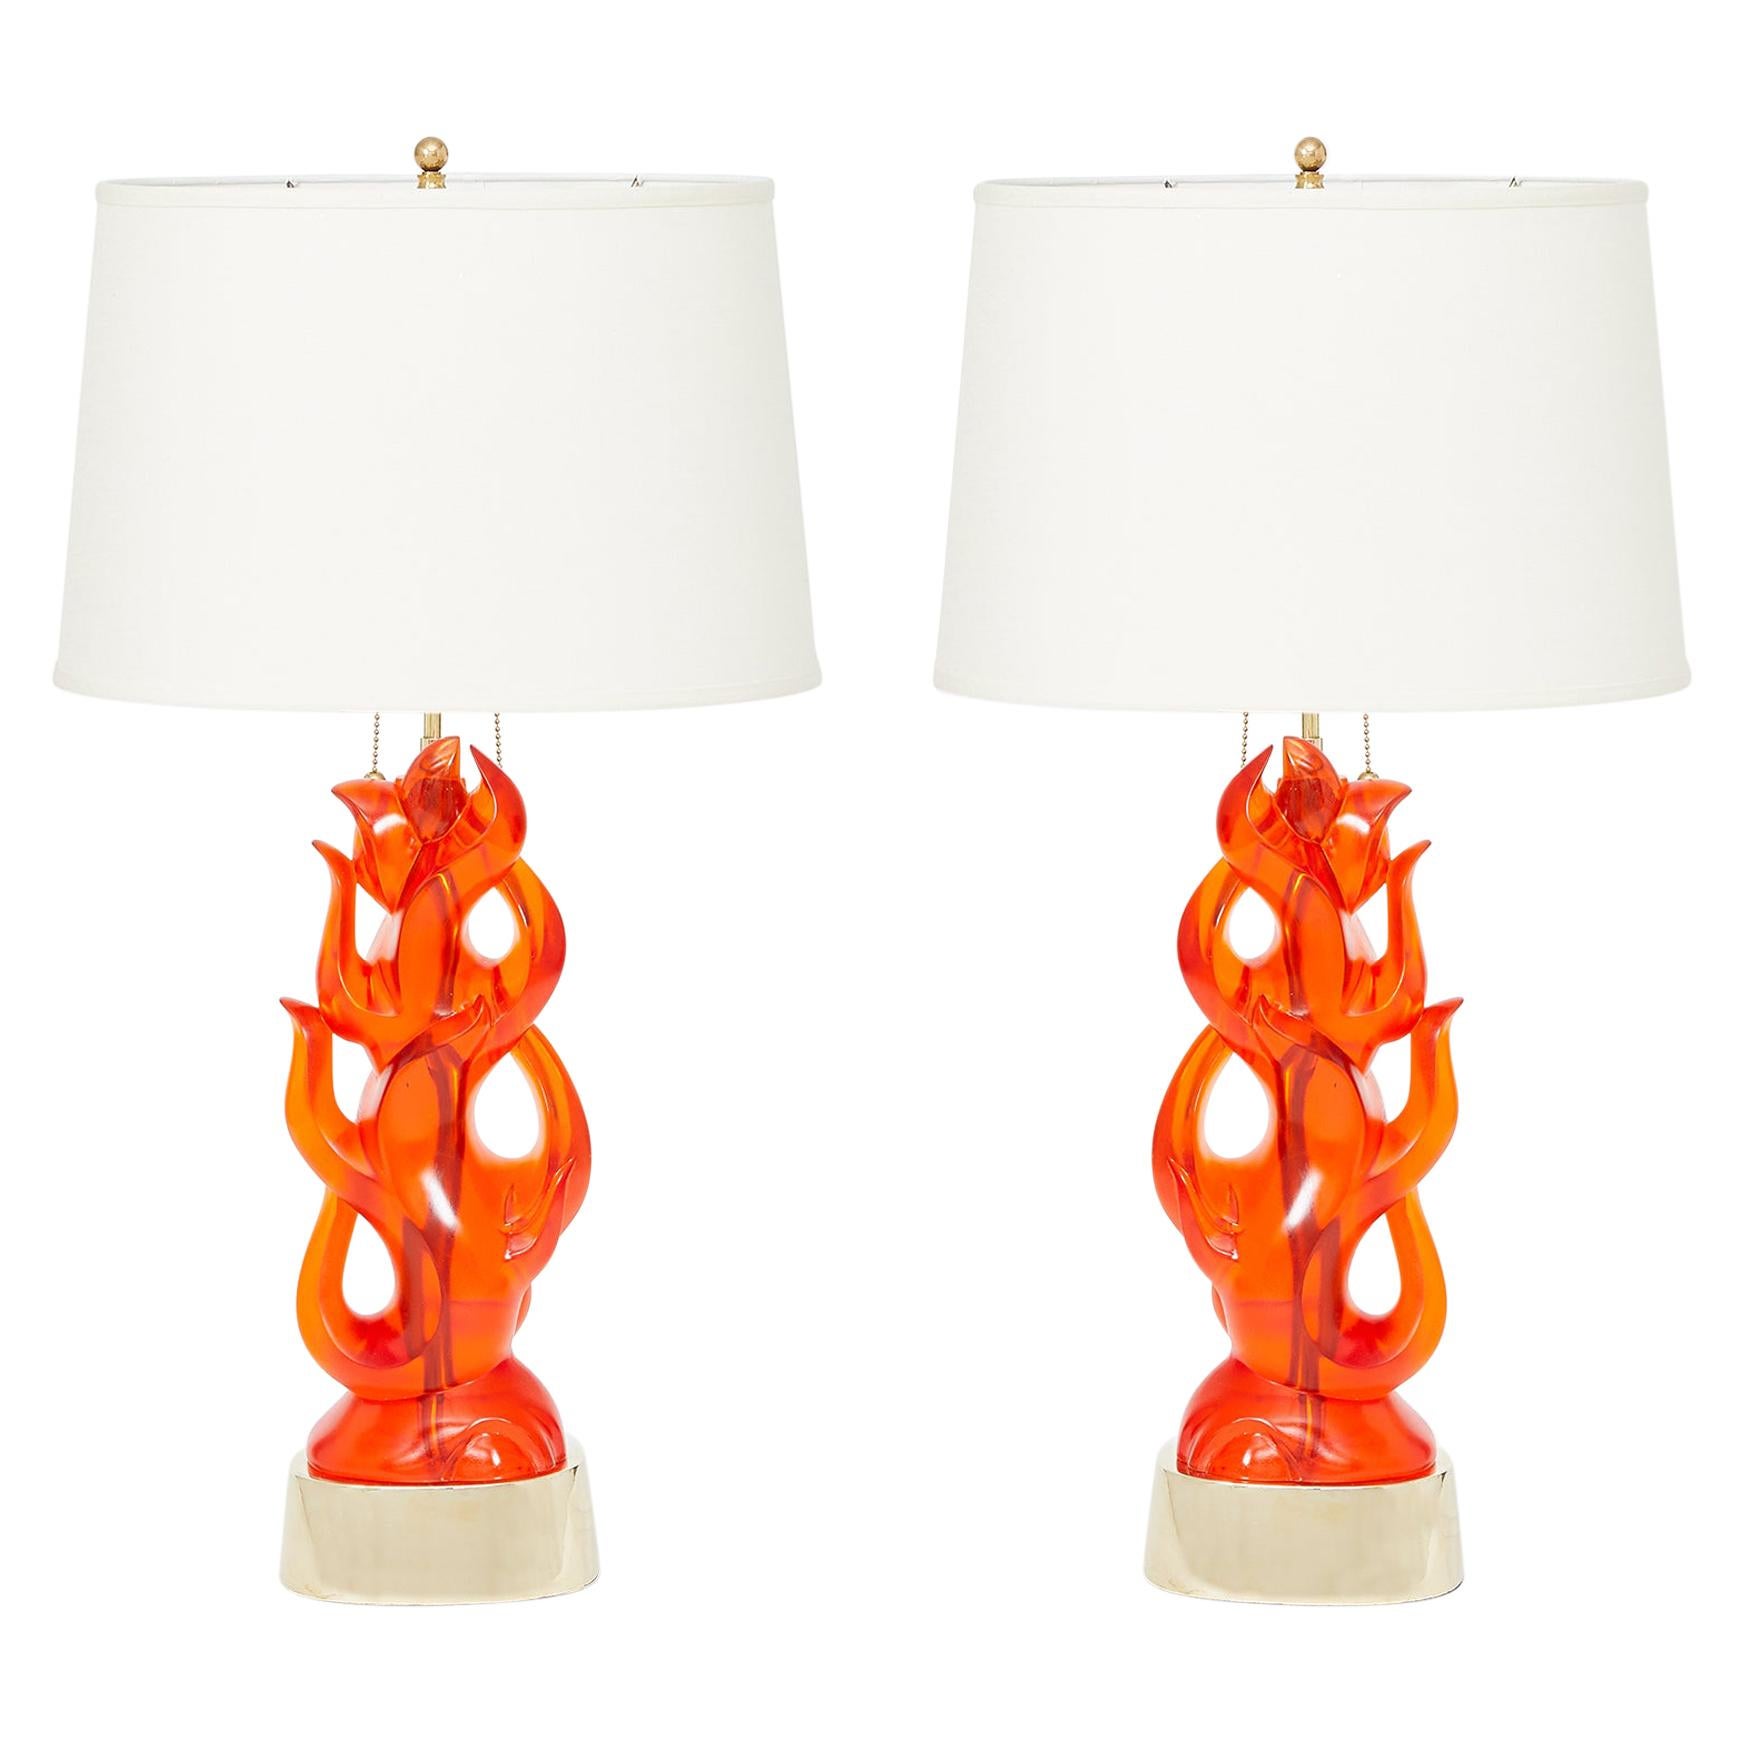 Pair of Candela Lamps in Coral by David Duncan Studio For Sale